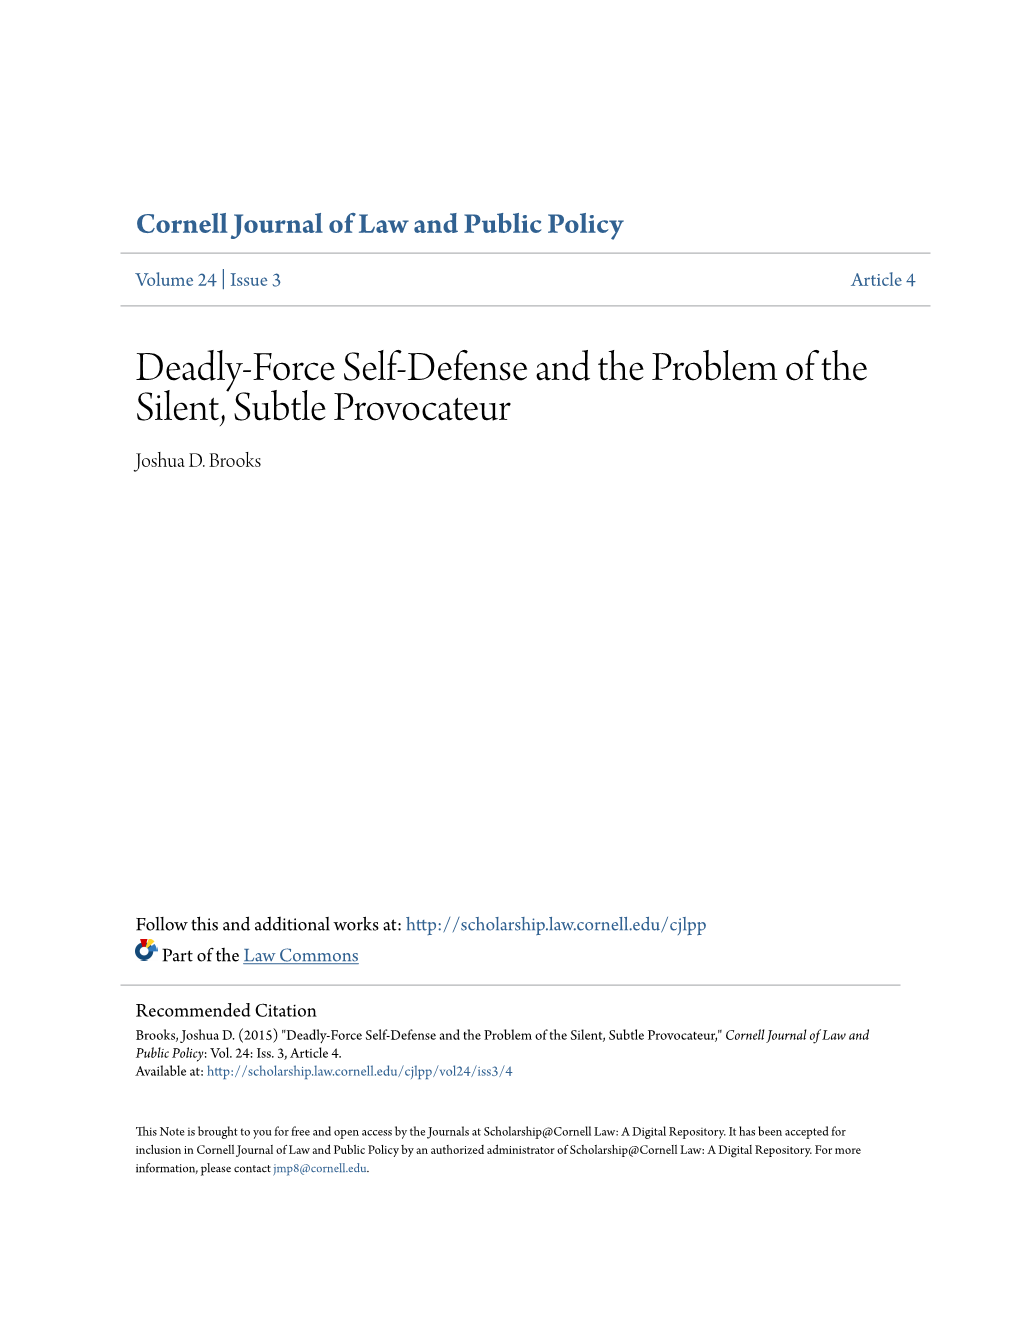 Deadly-Force Self-Defense and the Problem of the Silent, Subtle Provocateur Joshua D